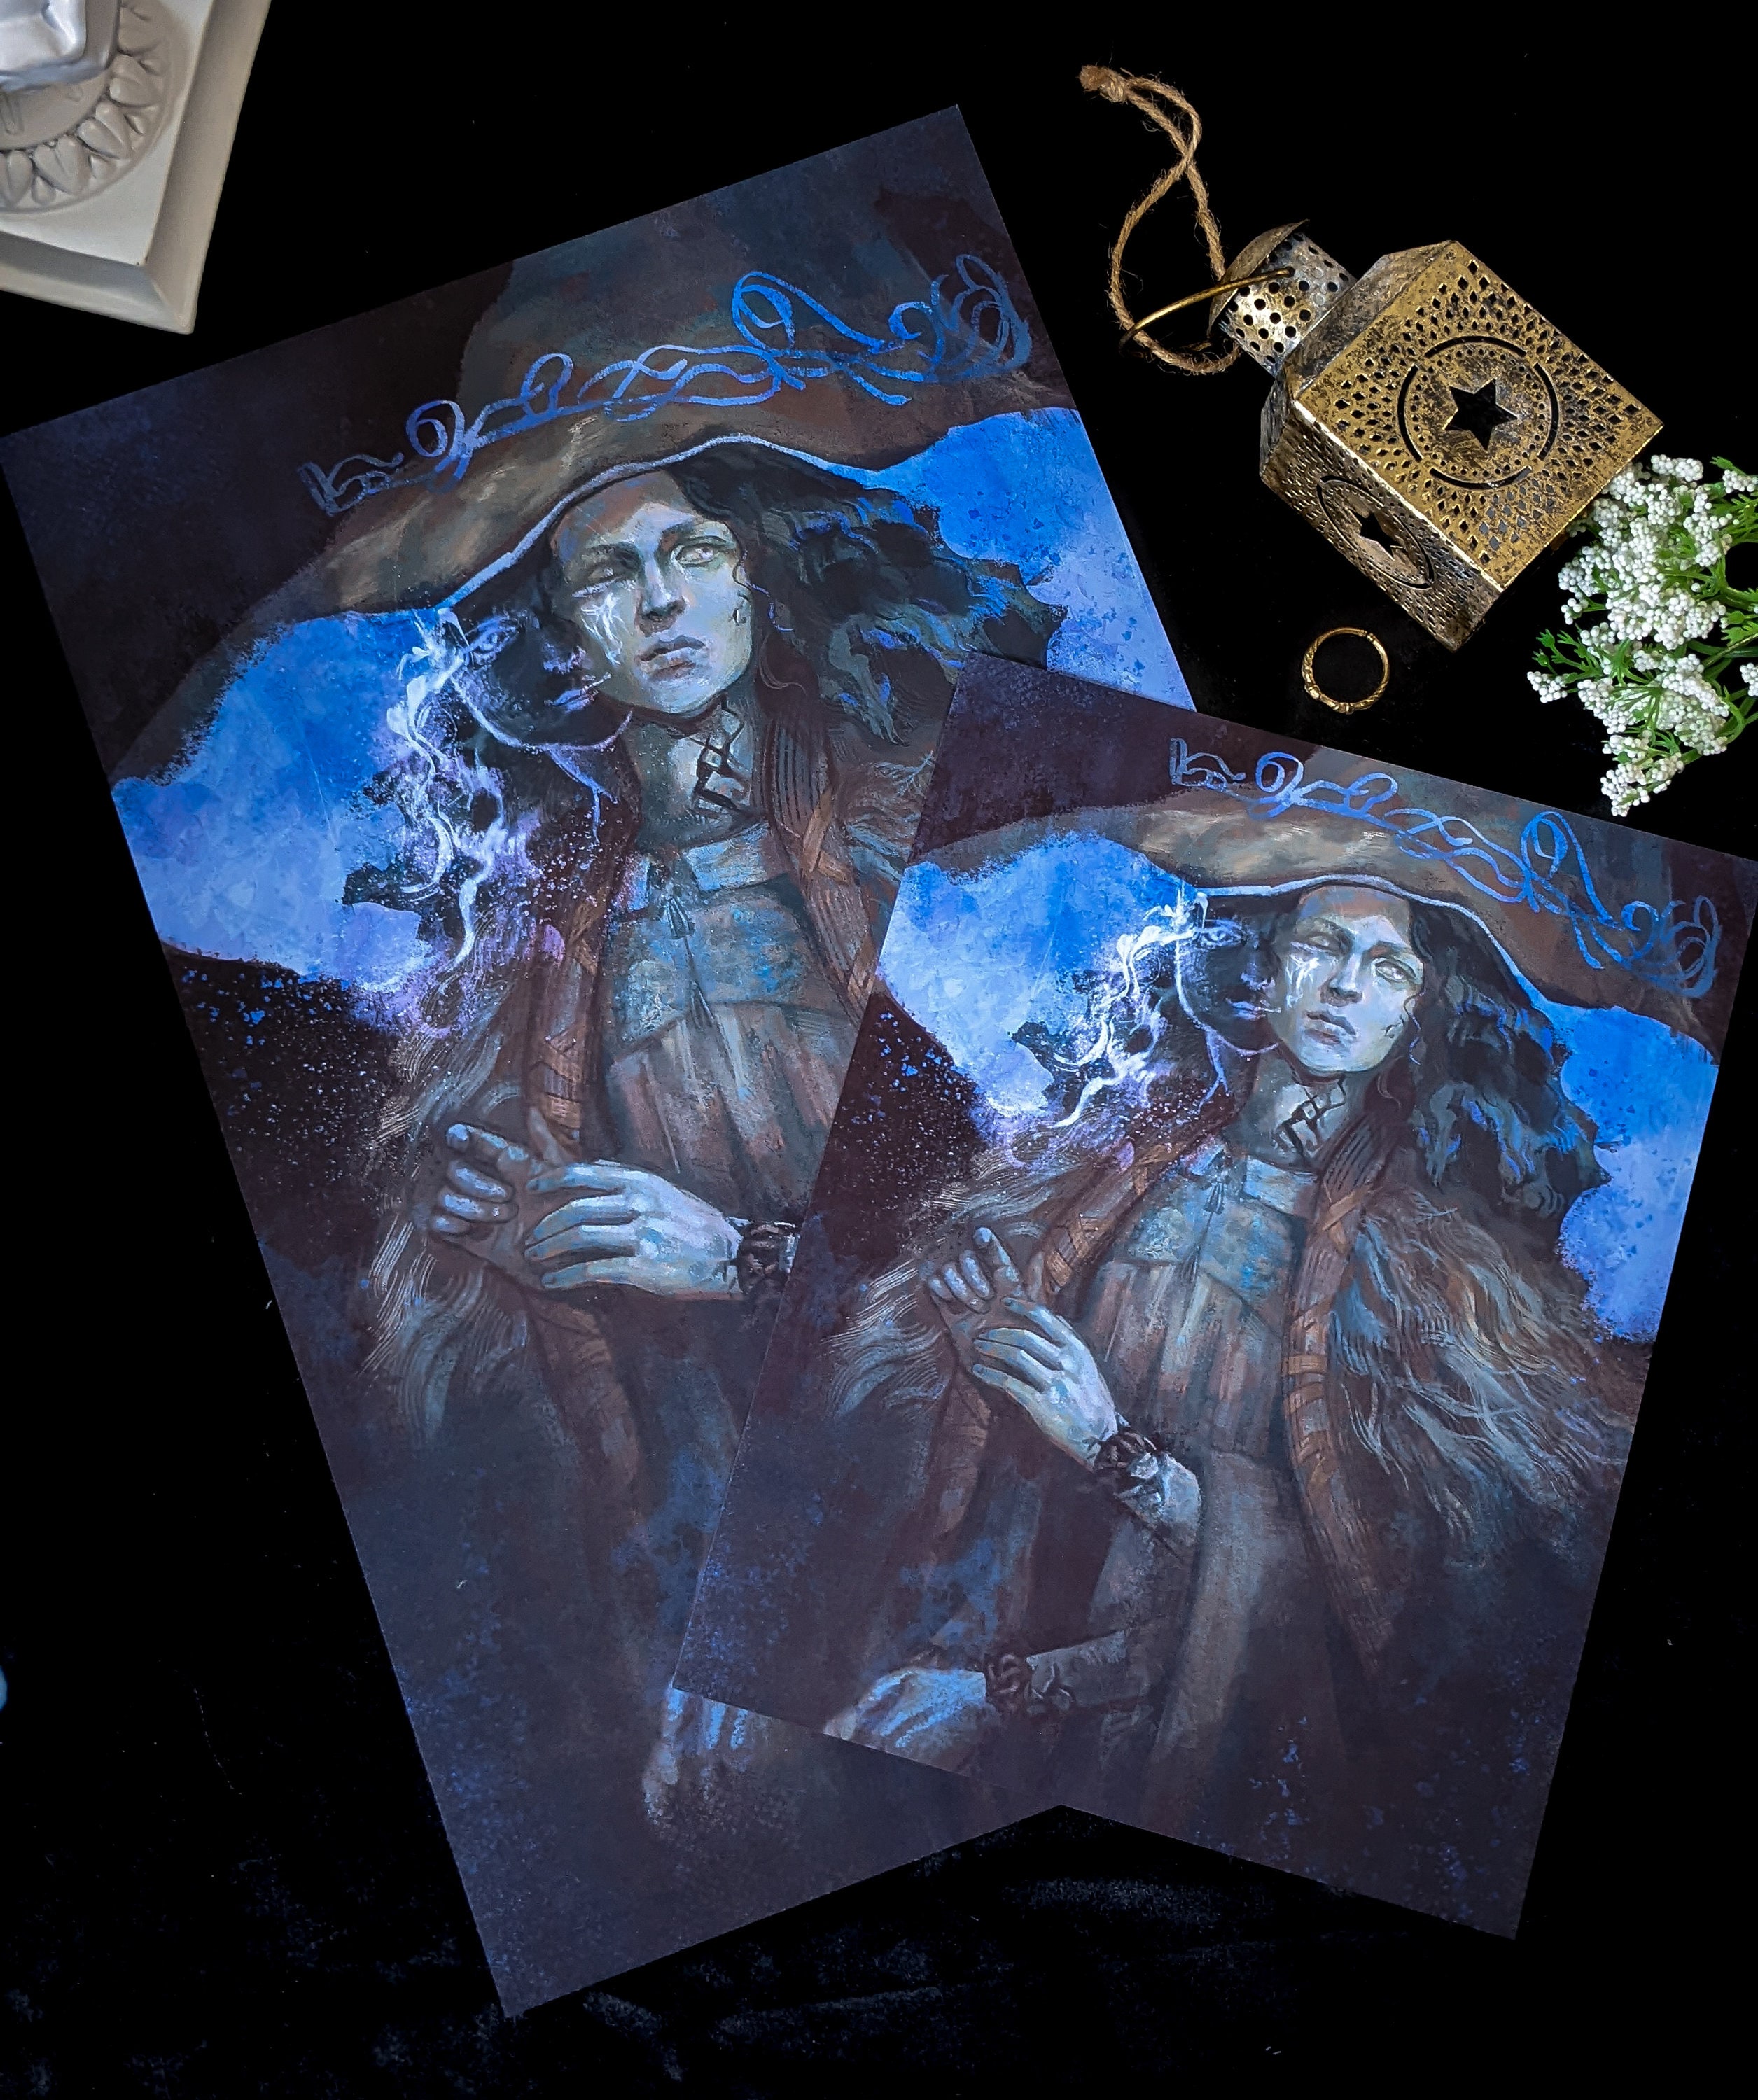  Ranni Fan Art Witch Poster Canvas Prints Wall Art For Home 1  panels Decorations With Framed 36x20: Posters & Prints